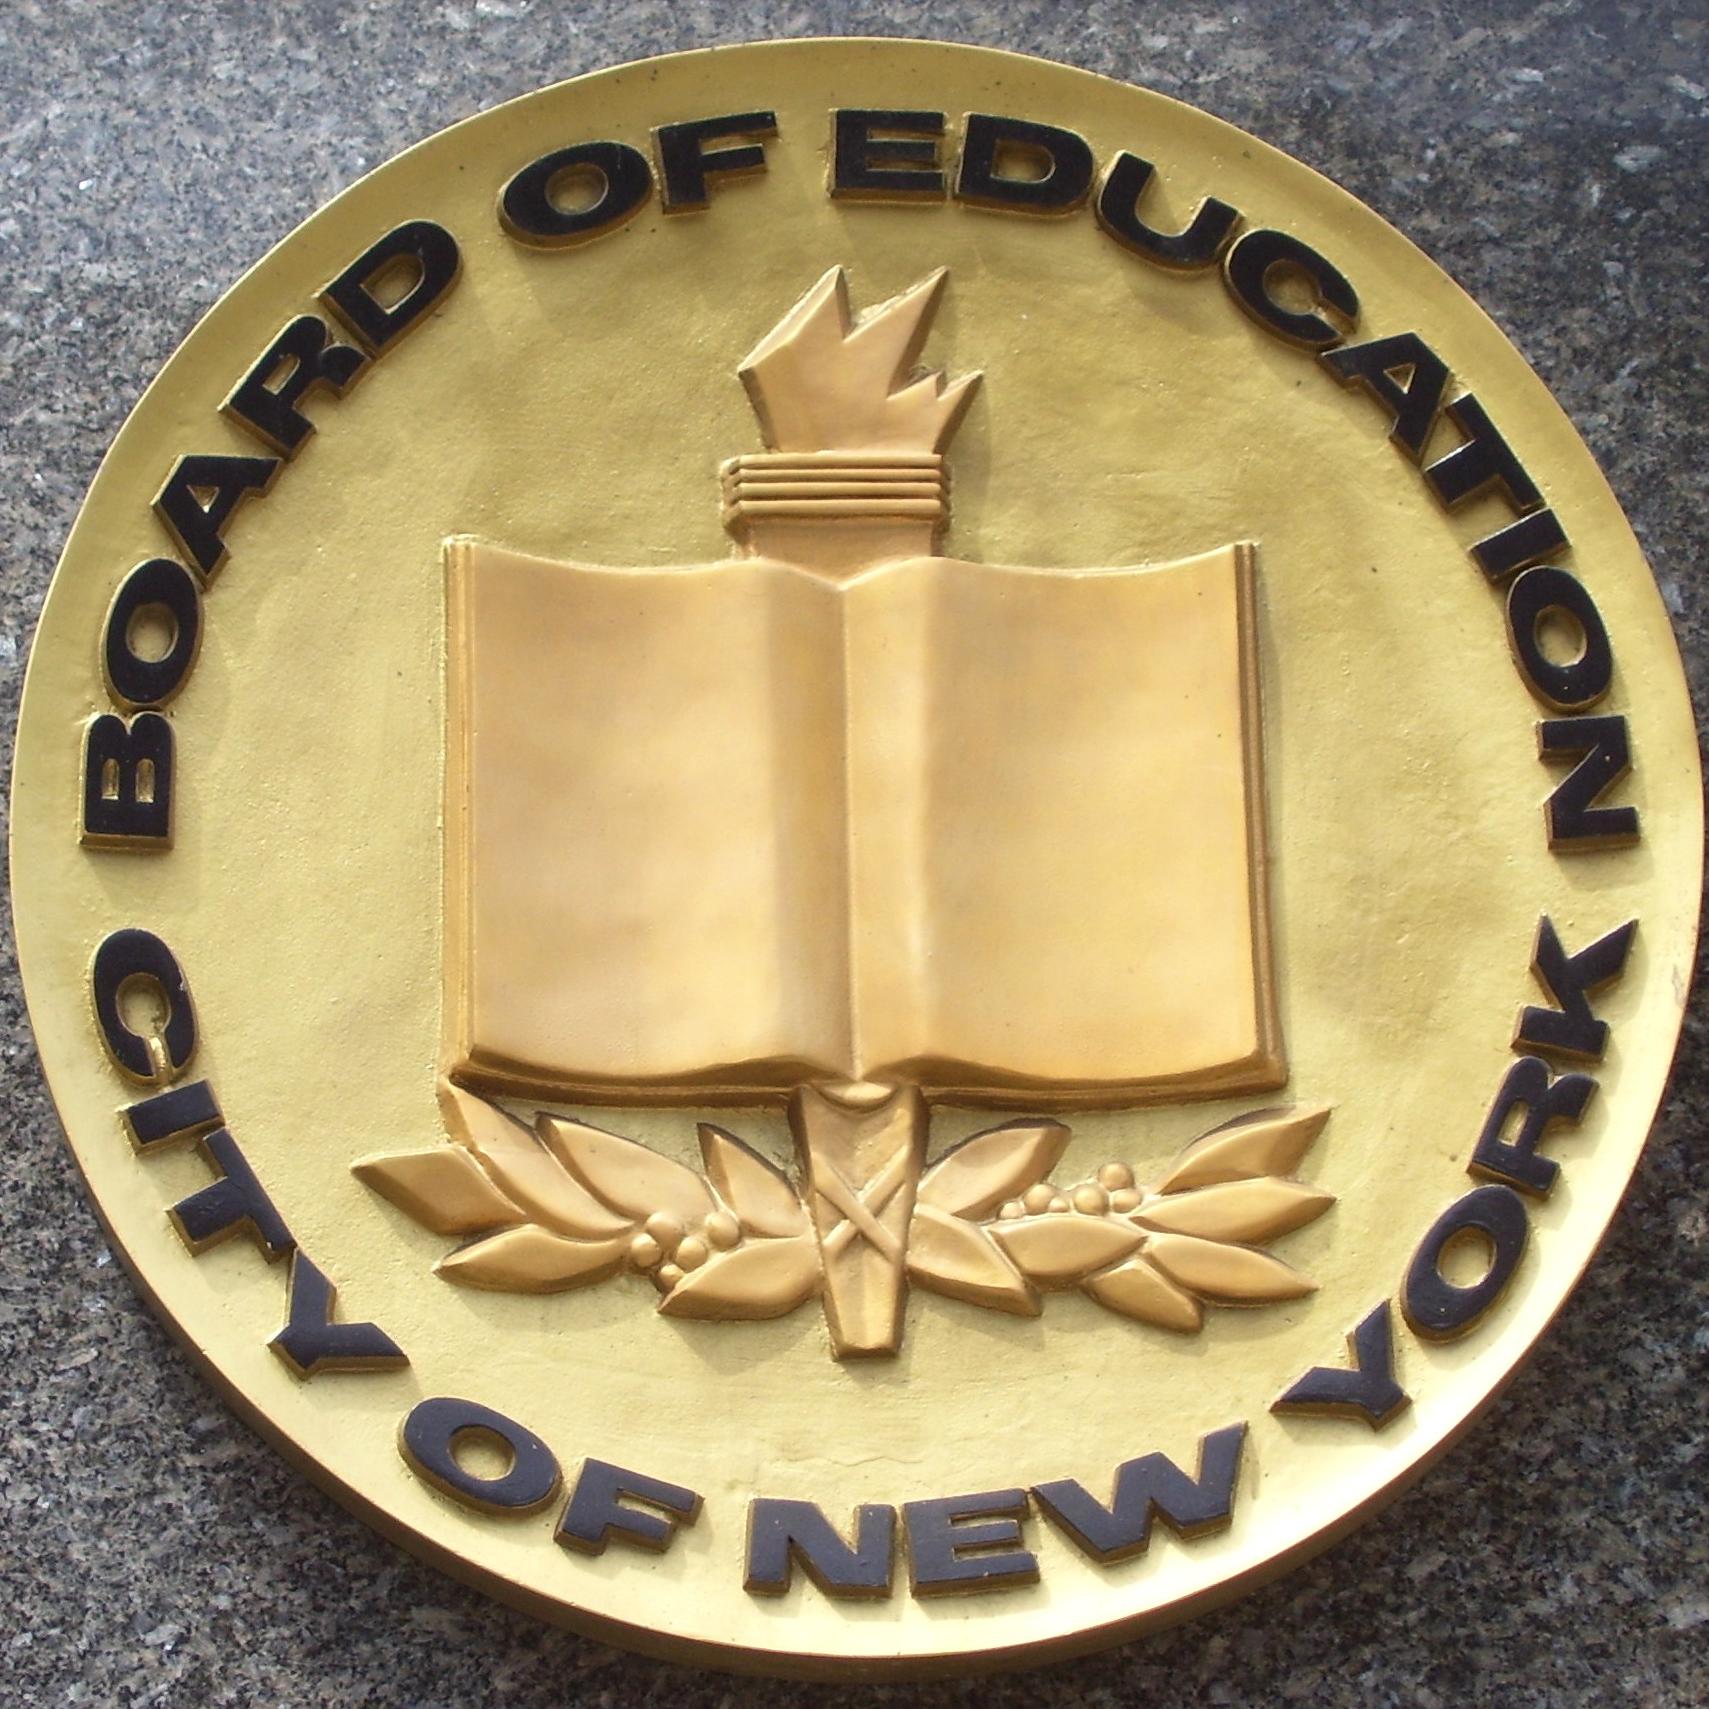 Hasidic Education in New York: A Clash of Law, Politics, and Culture